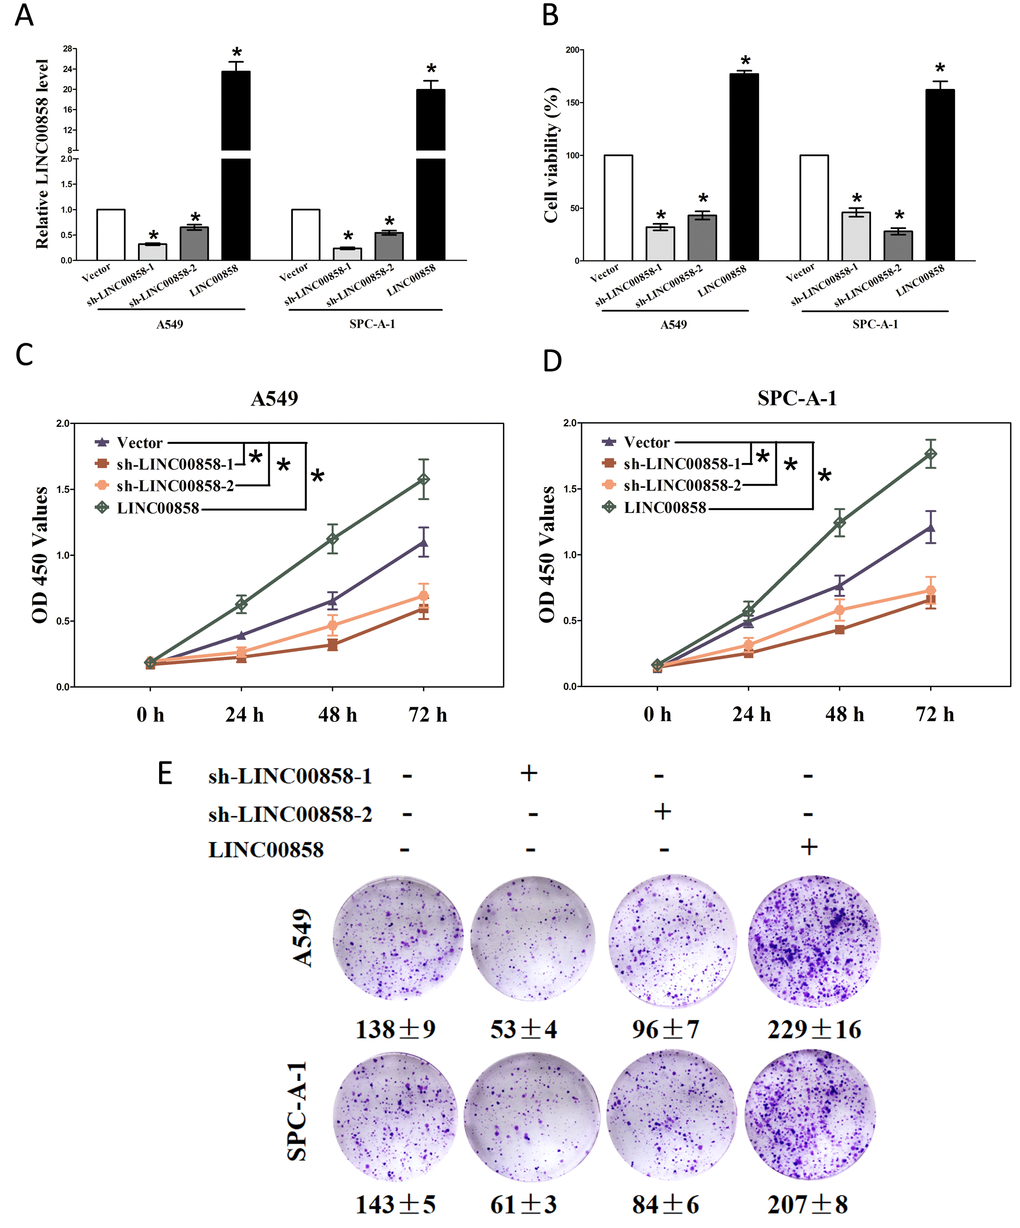 LINC00858 promotes tumor NSCLC cell growth in vitro. (A) Relative LINC00858 expression after transfection with sh-LINC00858 or pcDNA3.1-CT-GFP-LIN00858. (B) Statistical analysis of trypan blue staining. (C-D) CCK8 assays of A549 and SPC-A-1 cells after transfection. (E) Shown are representative photomicrographs of colony formation assay after transfection for fourteen days. Assays were performed in triplicate. *P 